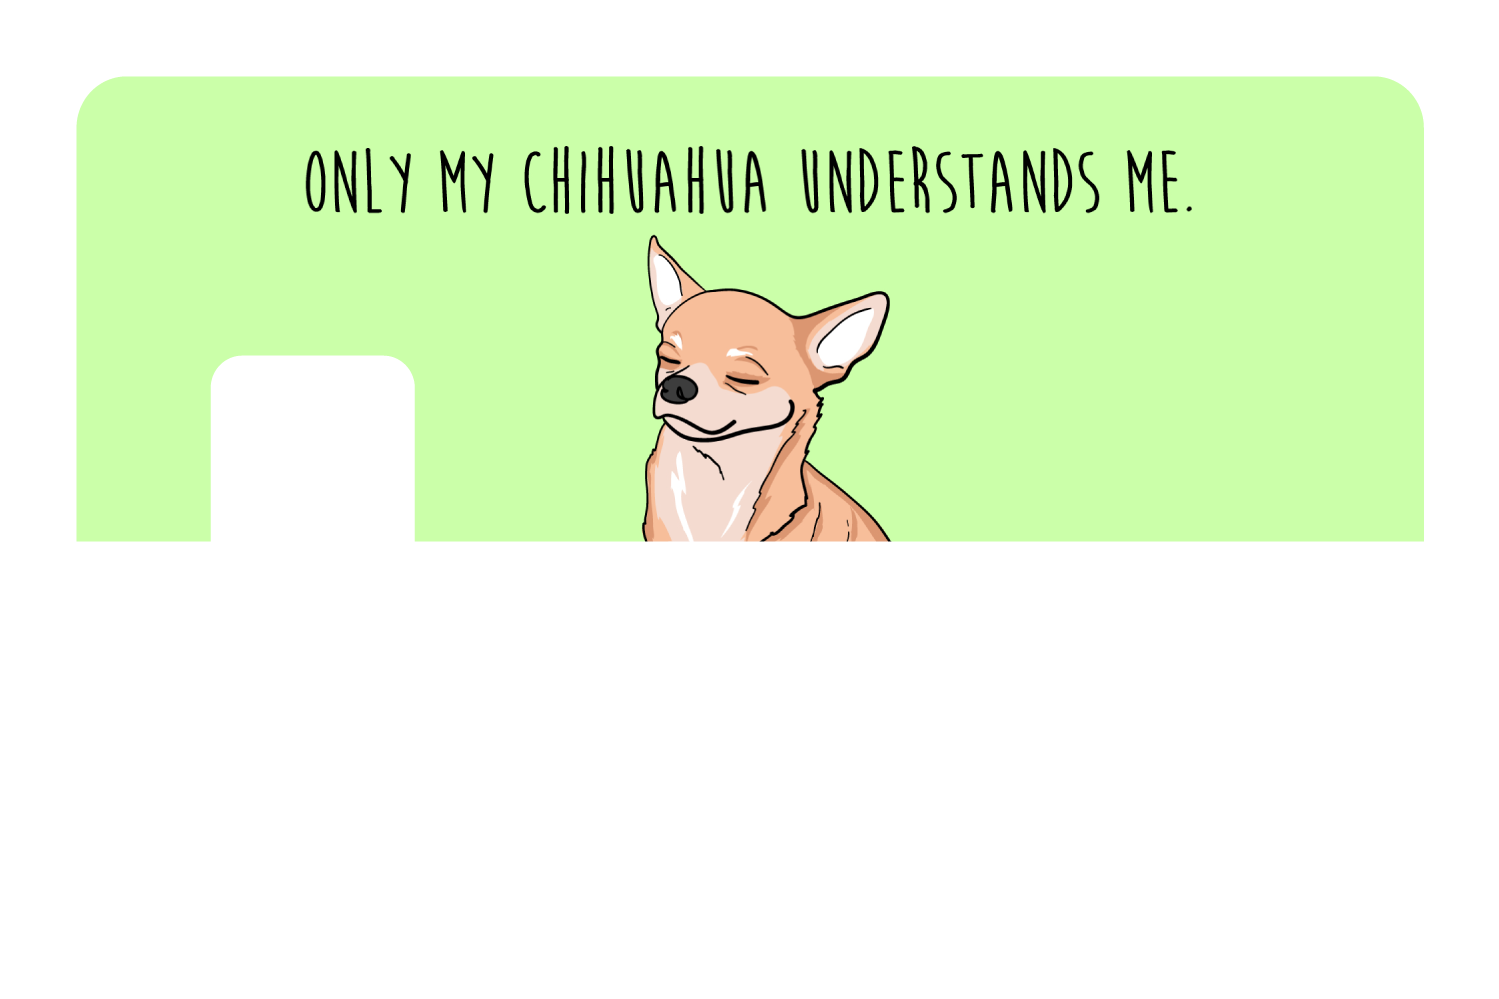 Only my Chihuahua understands me